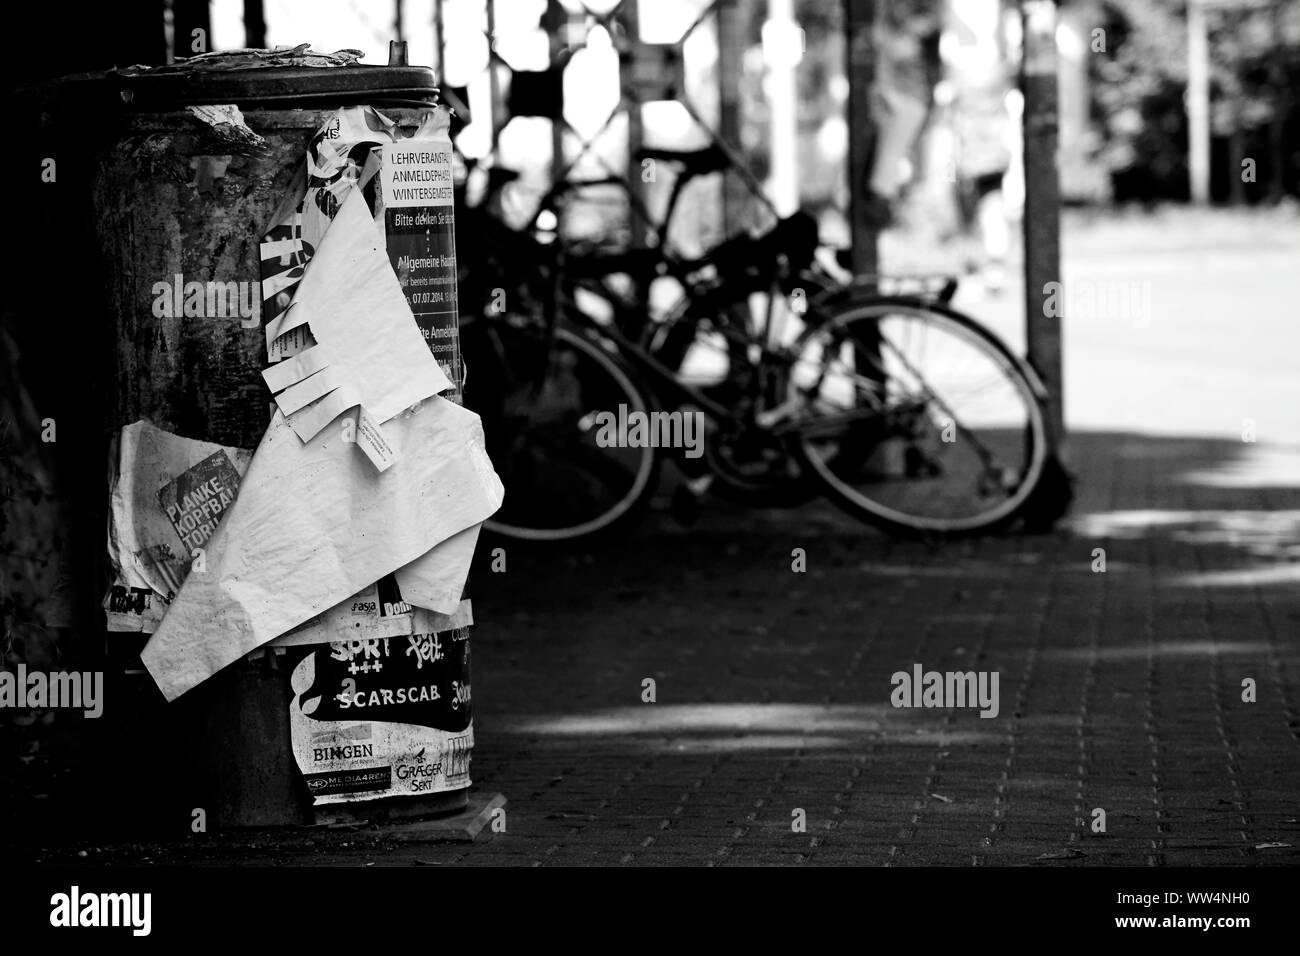 The monochrome photography of a dustbin in front of a bicycle stand, Stock Photo